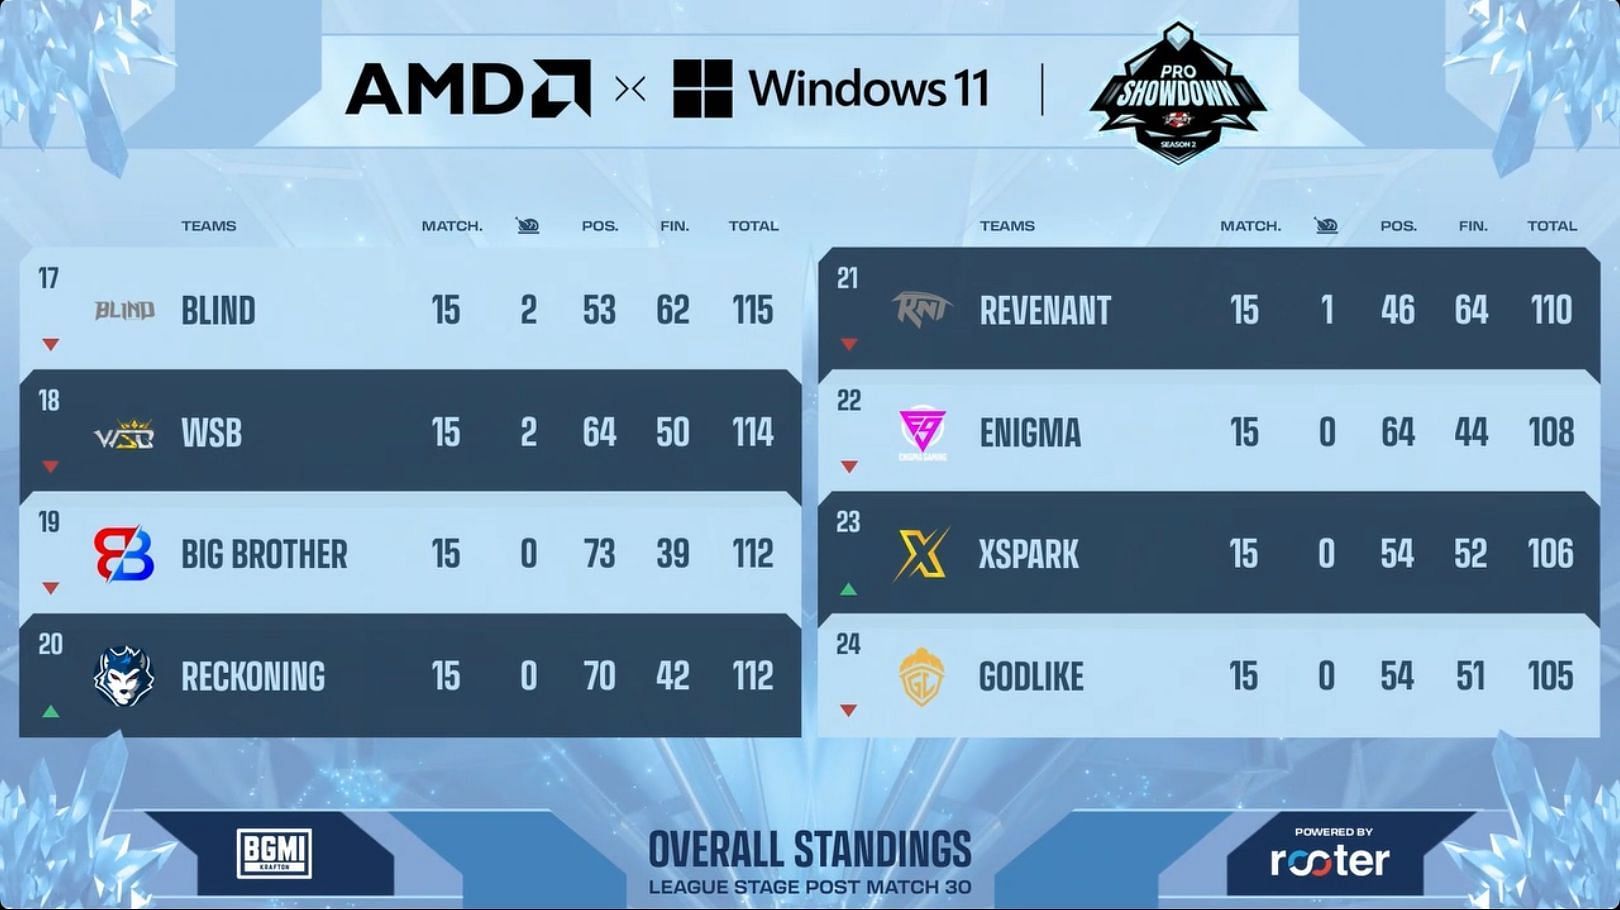 Blind remained in 15th place after Day 5 of the Pro Showdown Season 2 (Image via Upthrust Esports)